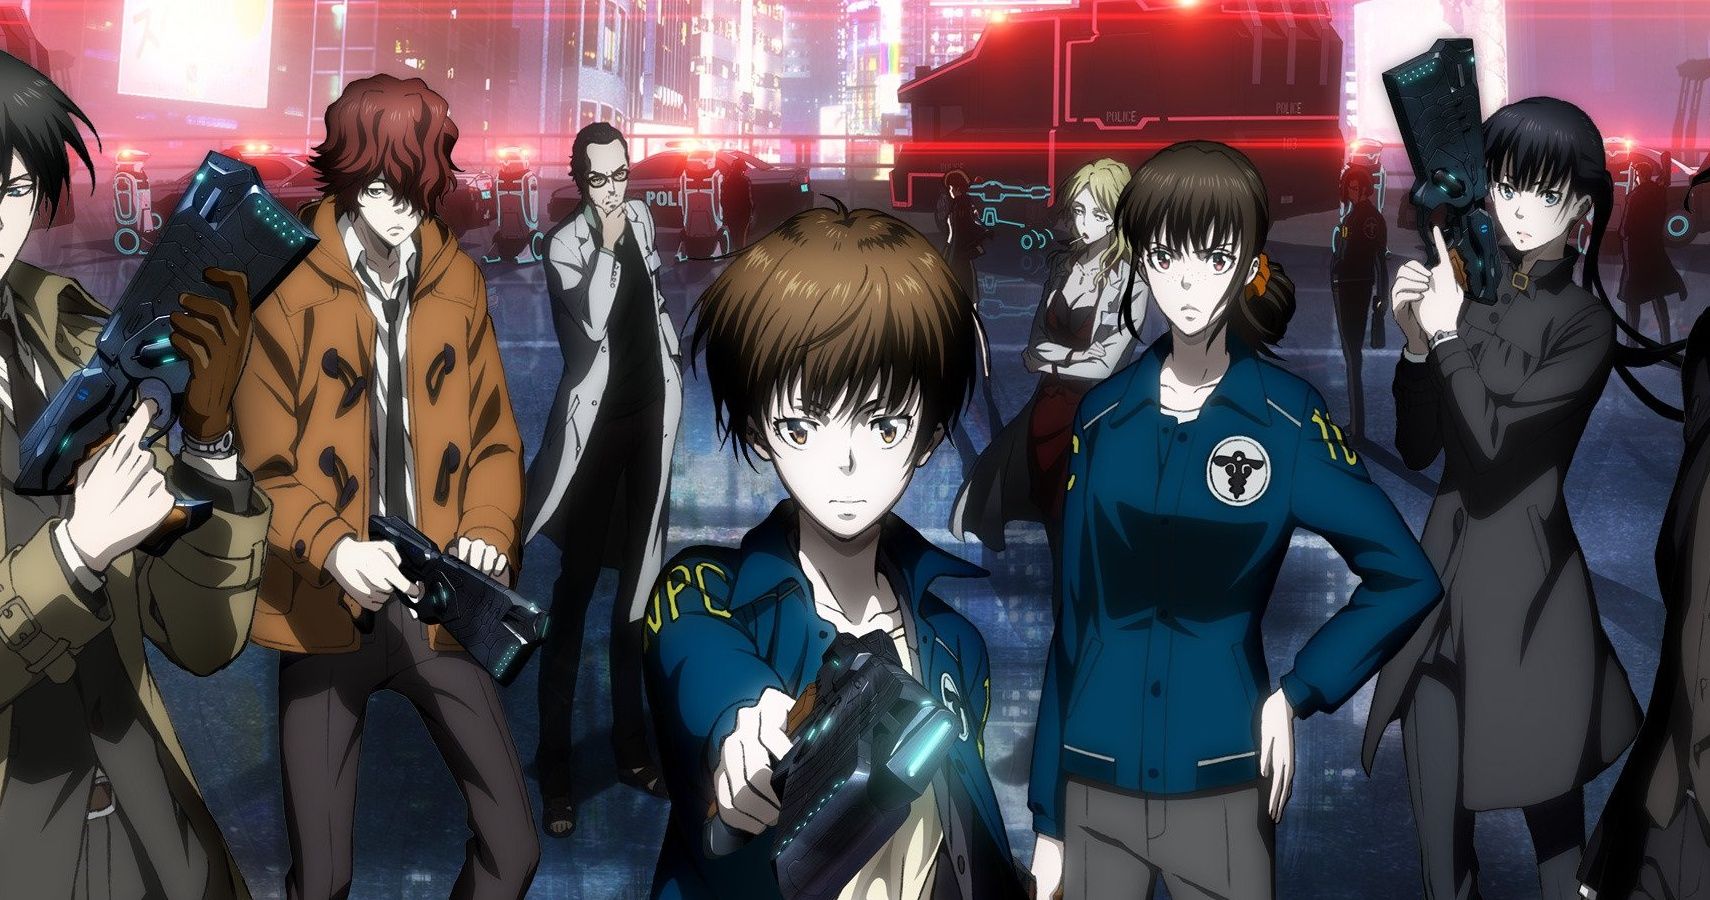 Psycho pass extended edition episode 1.